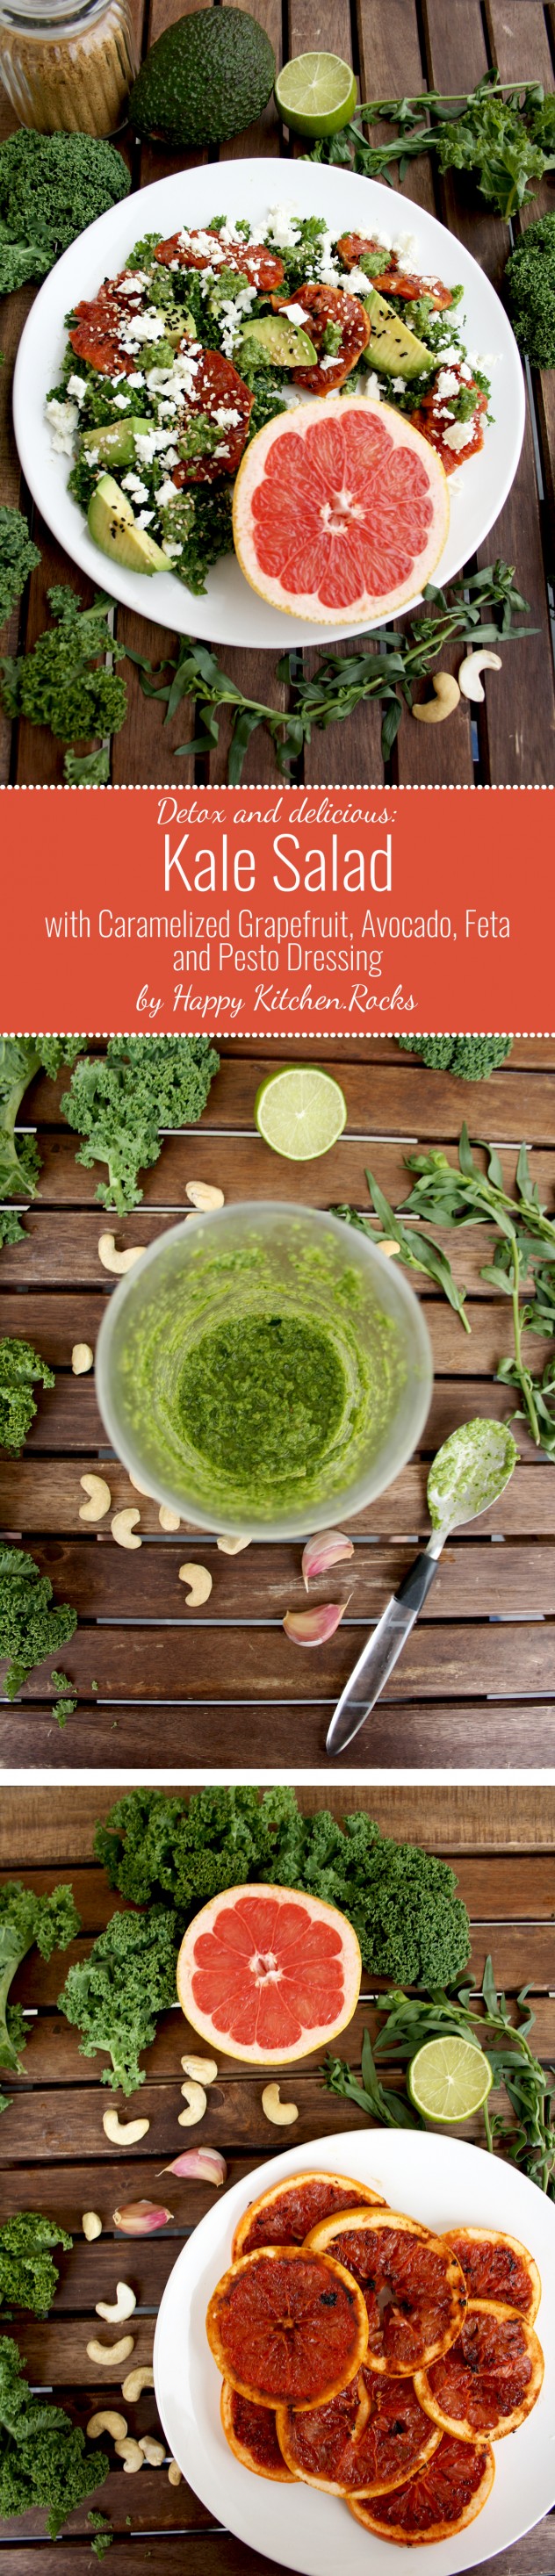 This detox kale salad with pesto dressing is designed to revitalize you and to make you feel good! It's also delicious, refreshing and easy to make.